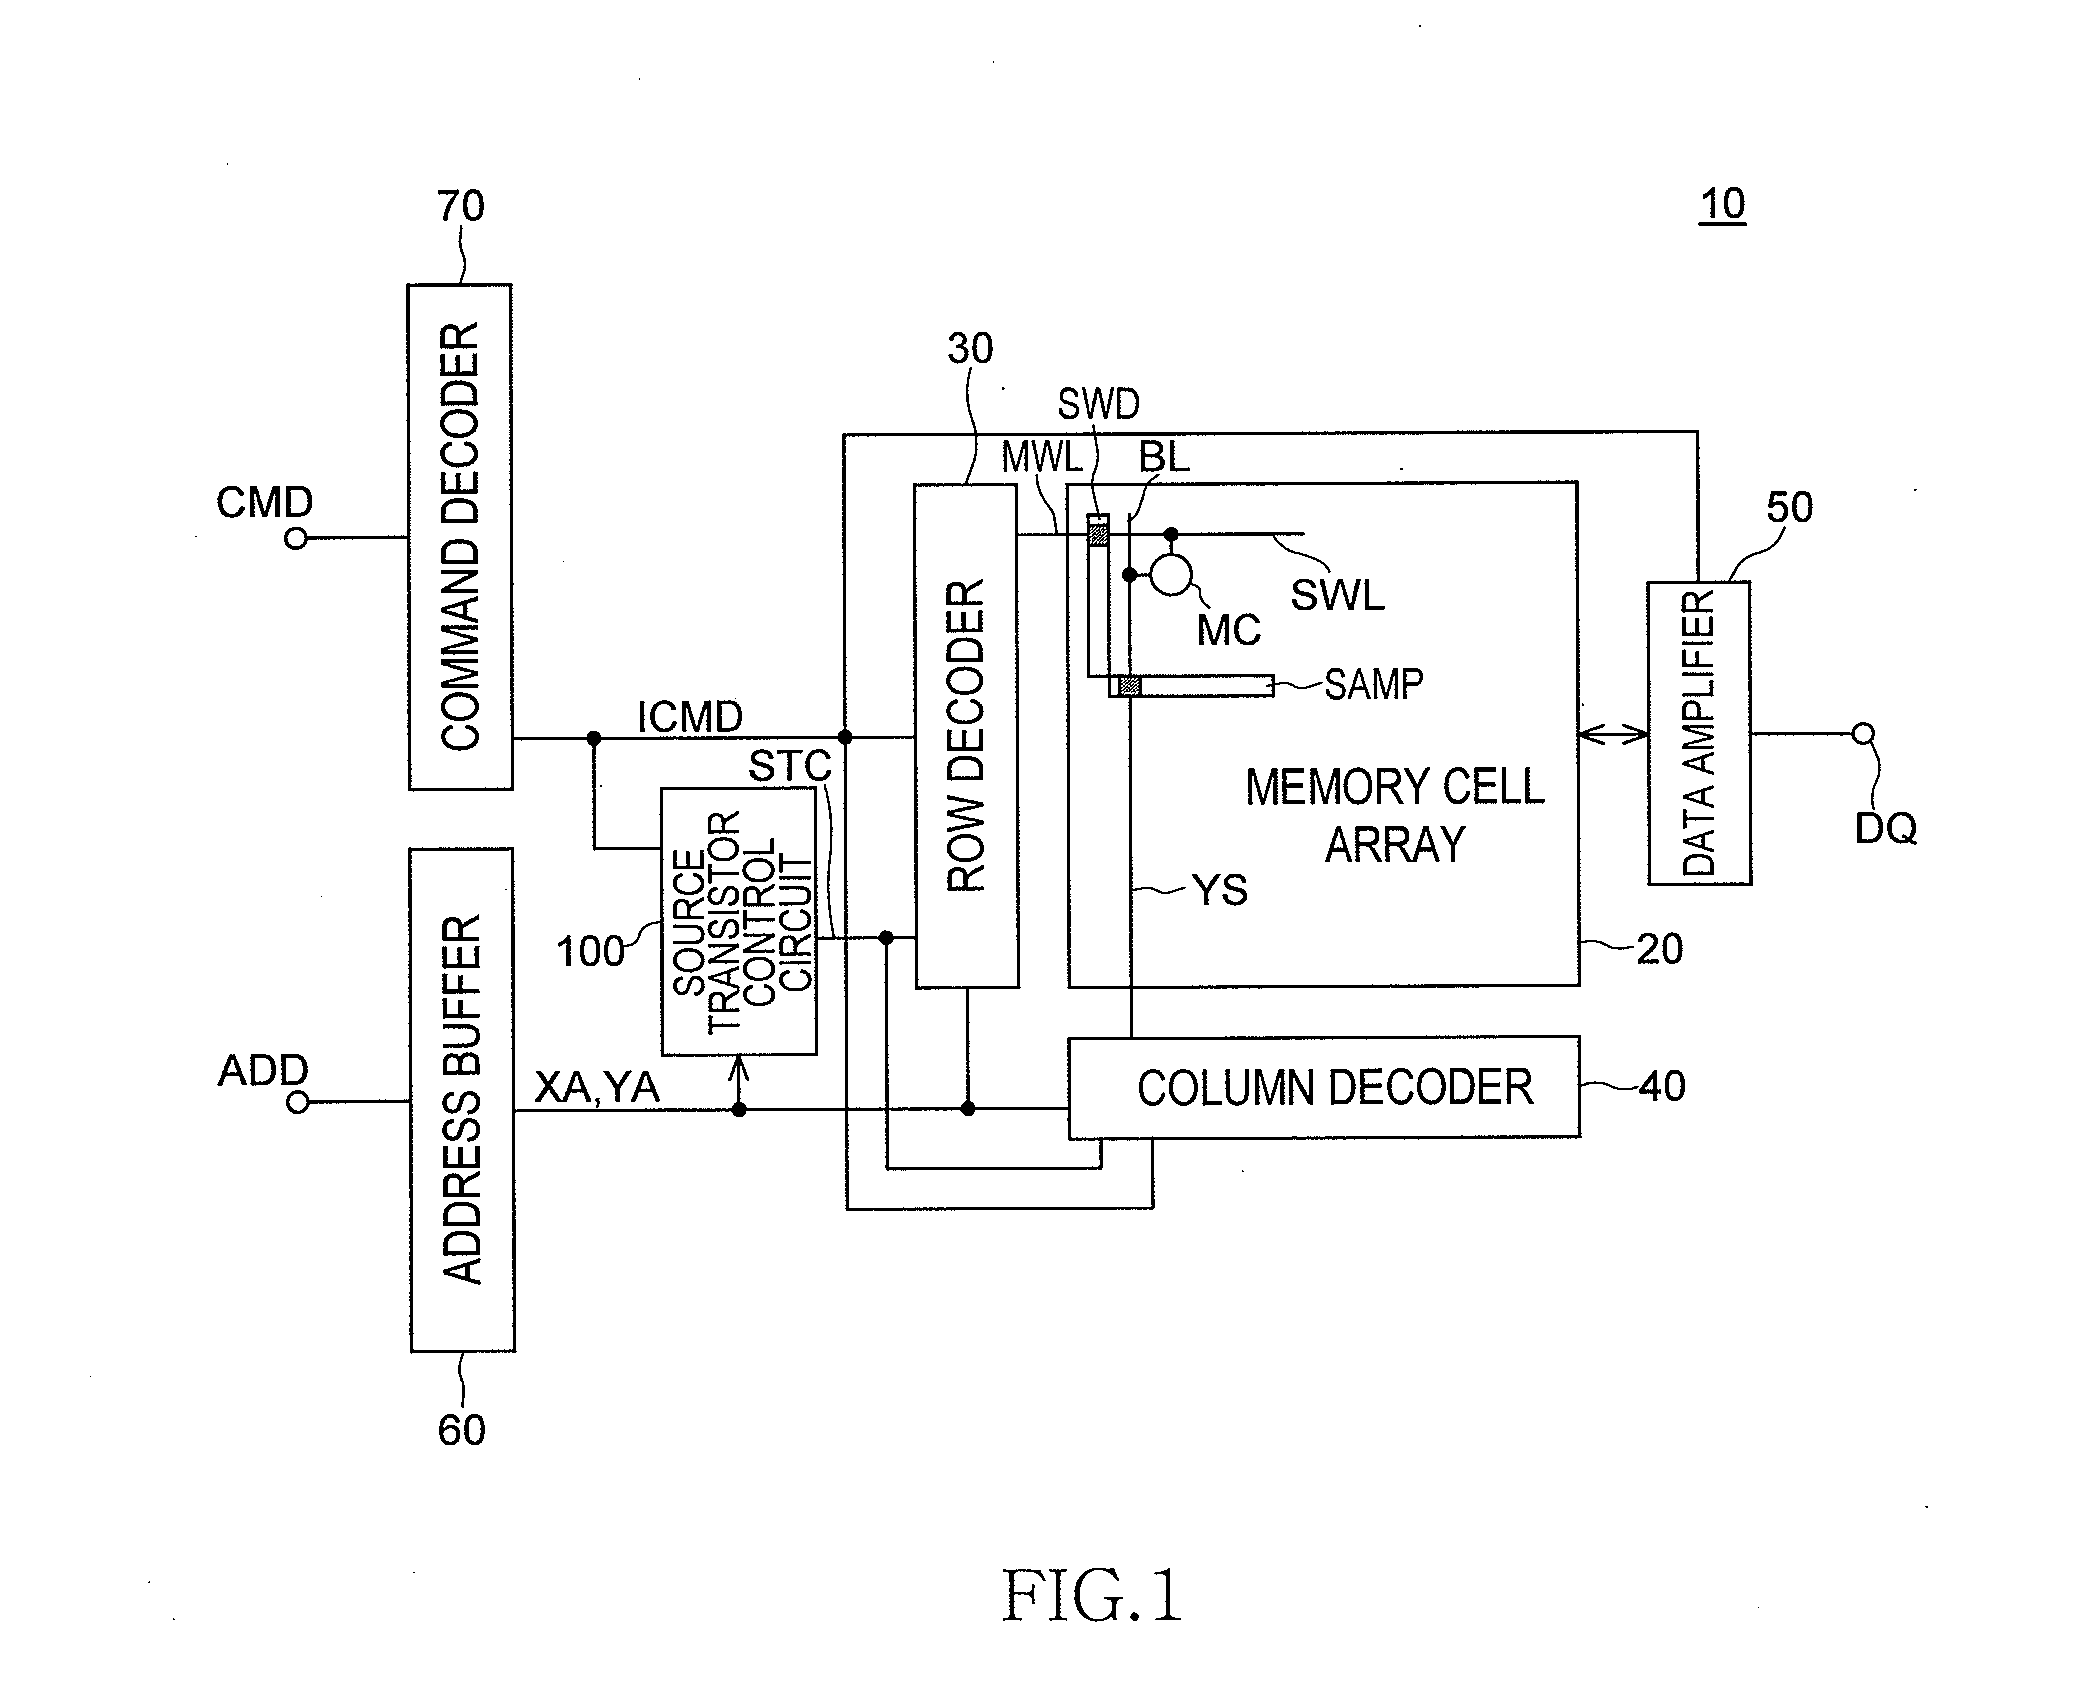 Semiconductor memory device having selective activation circuit for selectively activating circuit areas